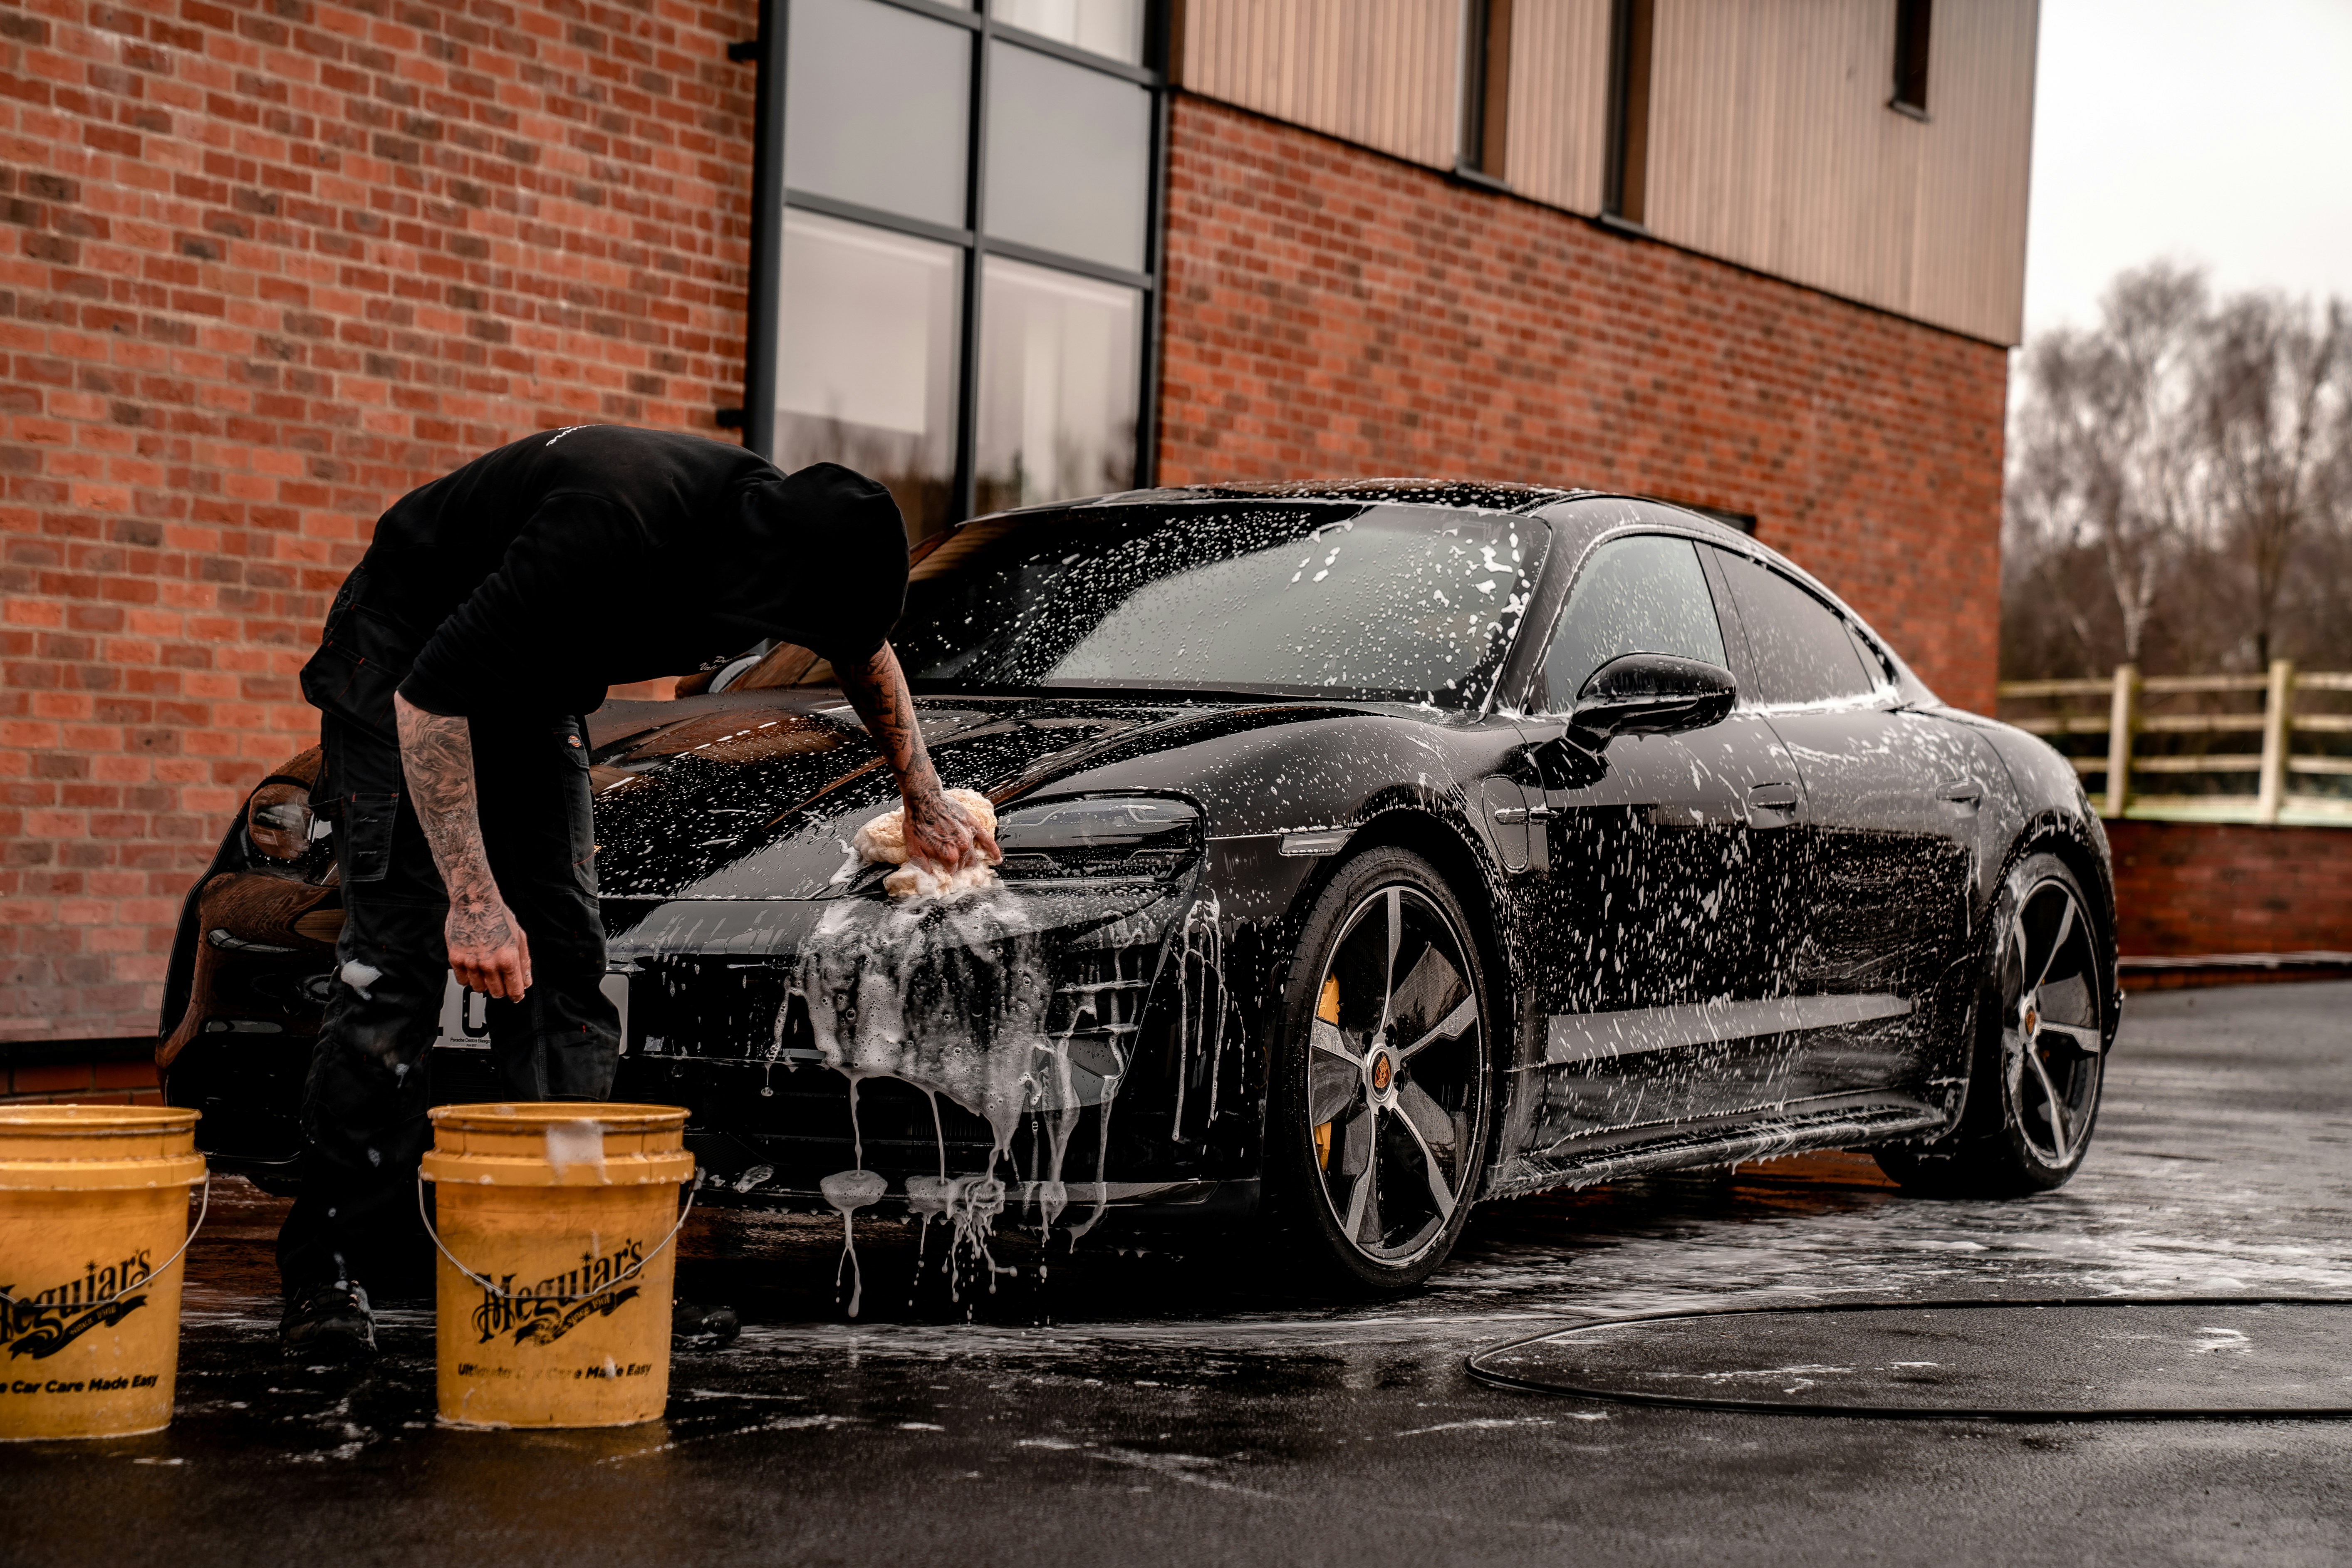 Car Detailing Equipment for Auto Detailers